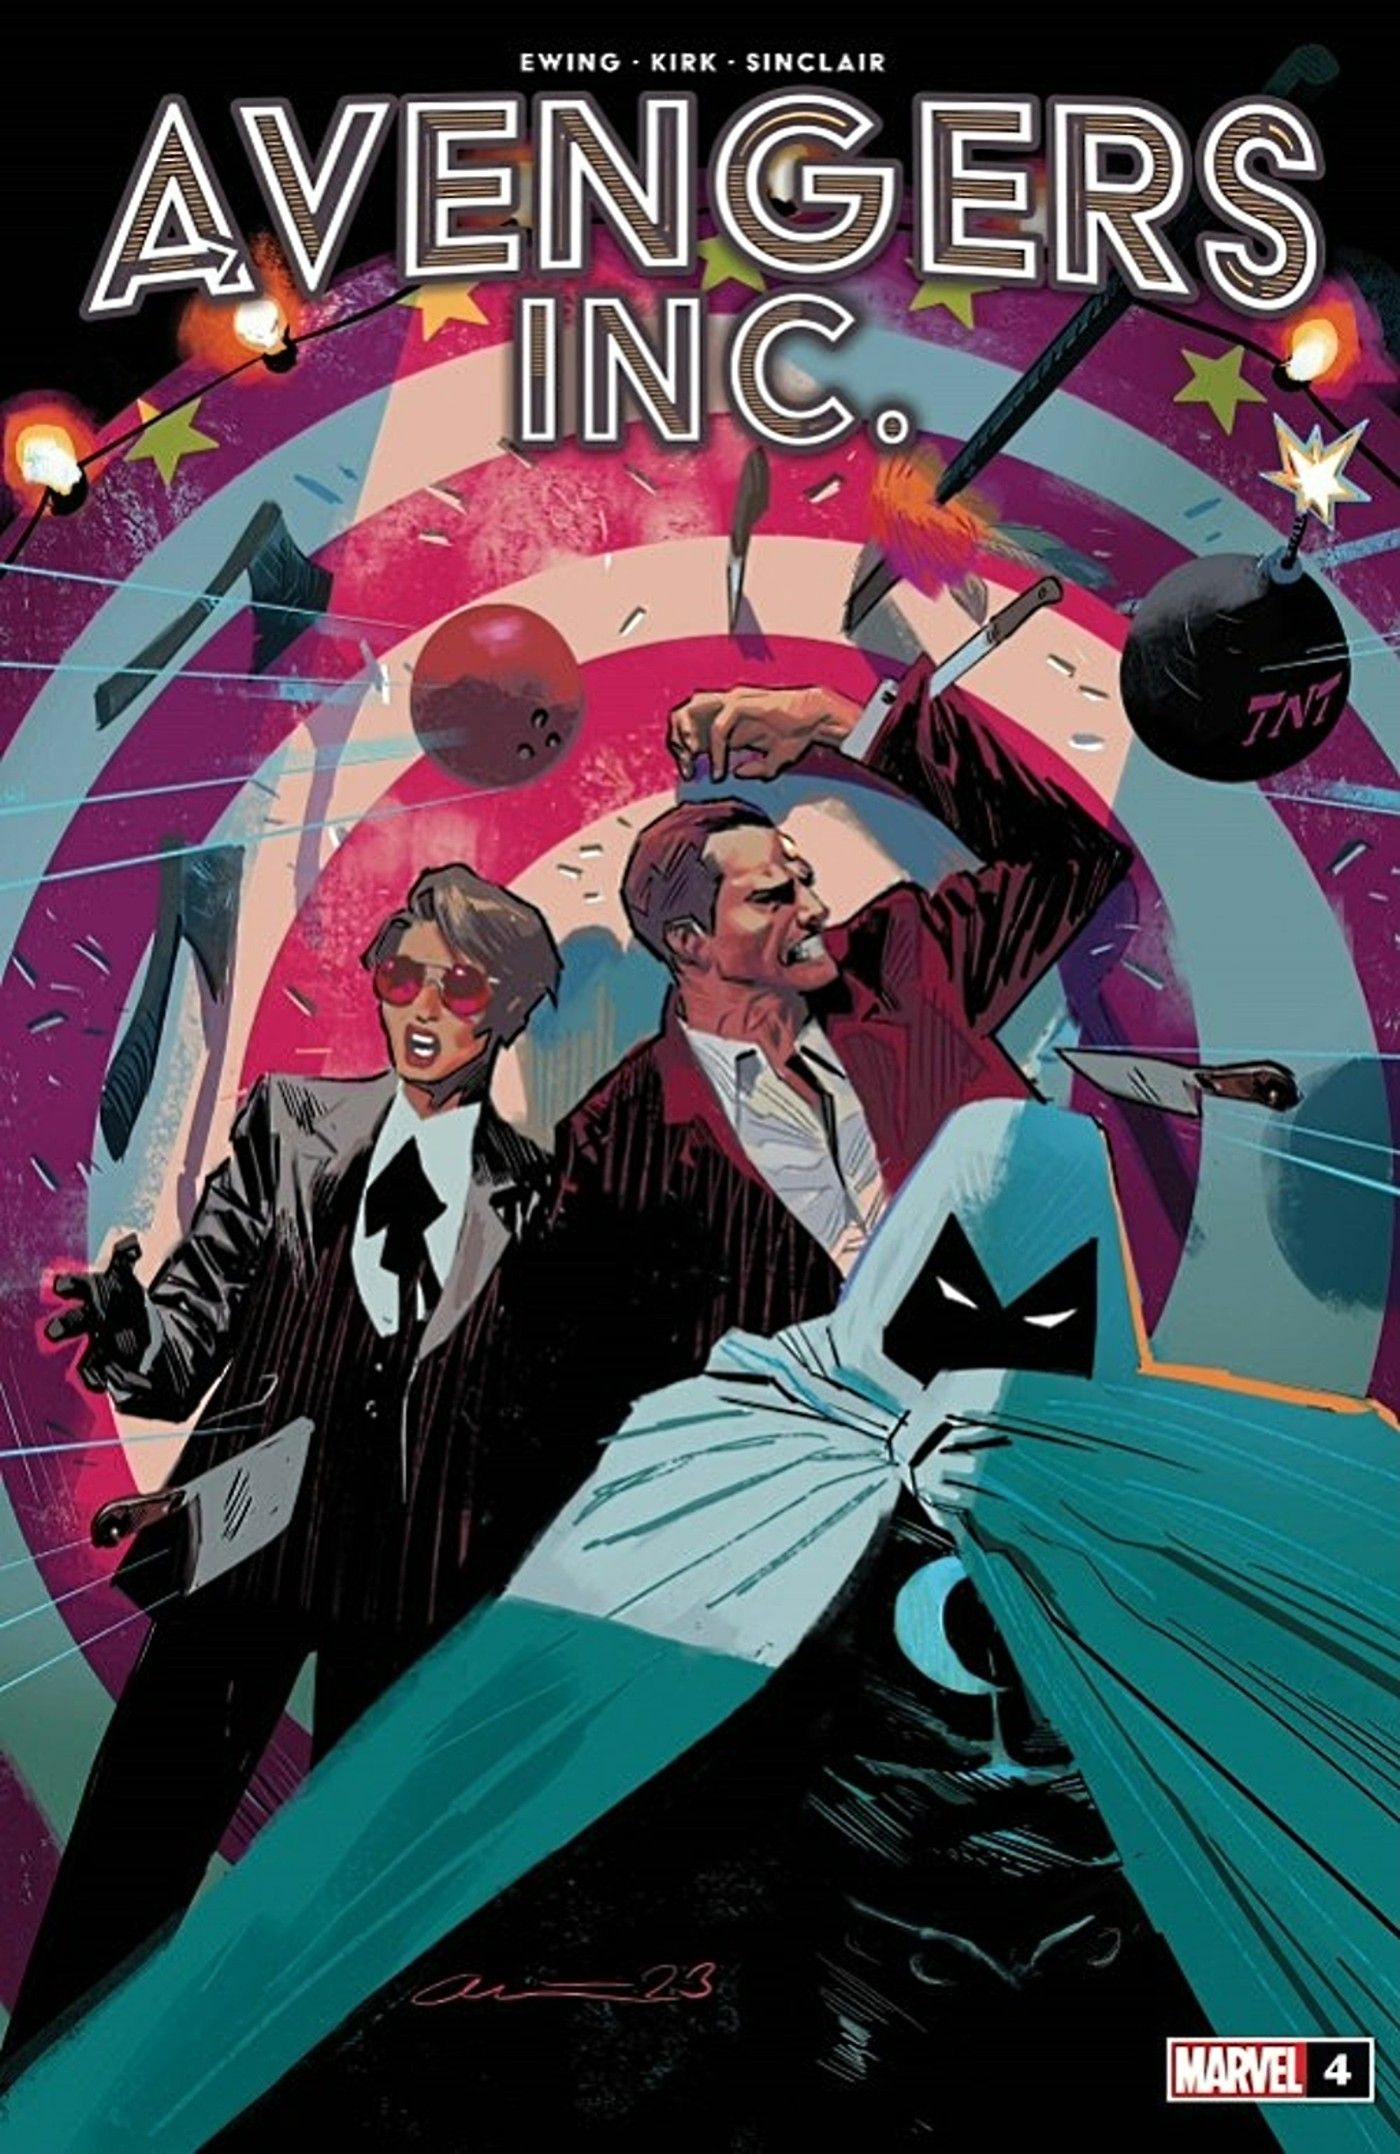 cover for Avengers, Inc. #4 featuring Wasp, Vic Shade, and Moon Knight